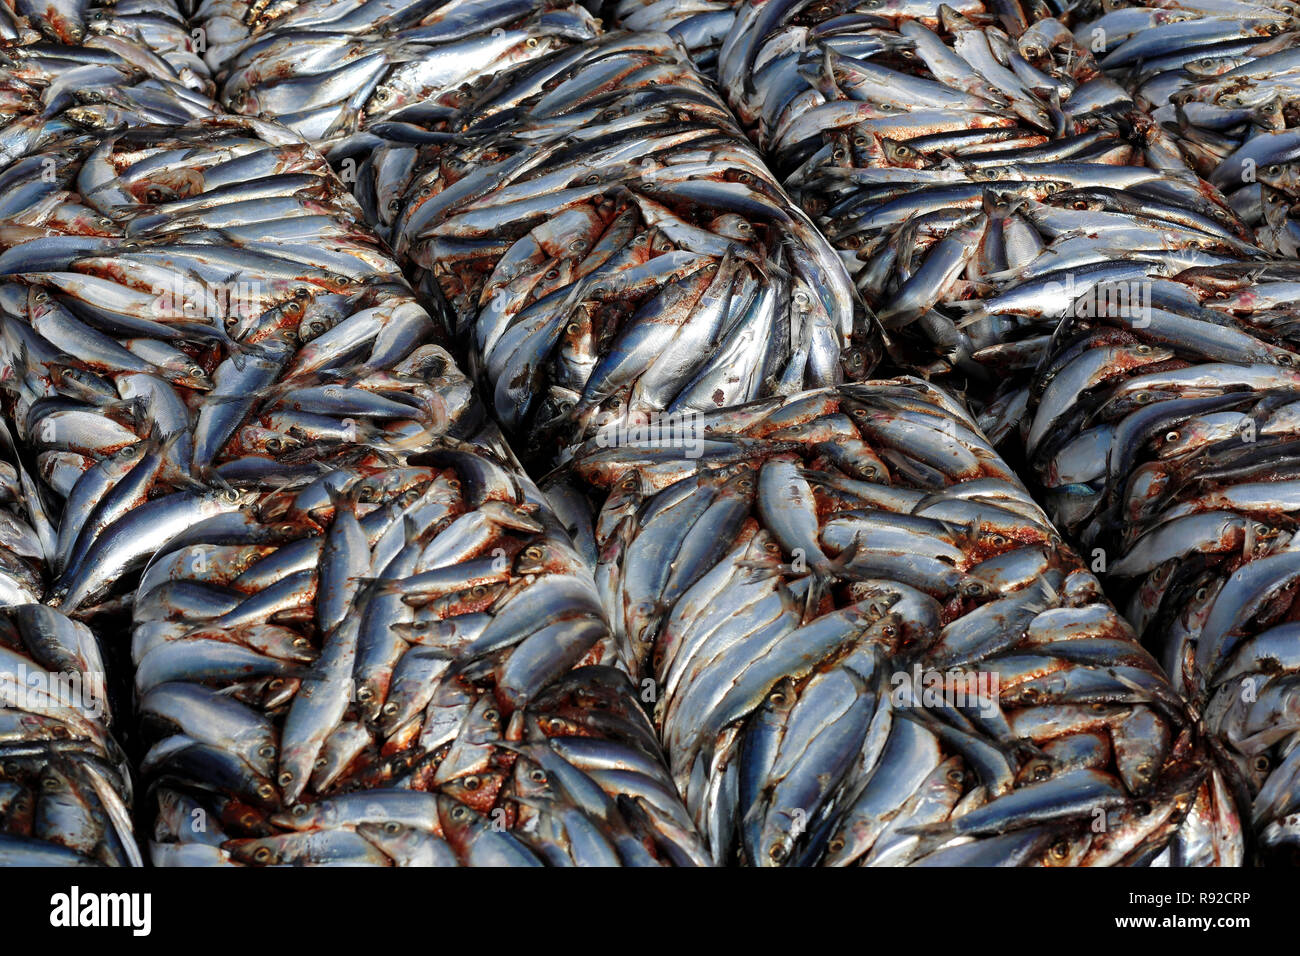 Frozen marine fishes to be dried at Nazirartek Dry Fish Plant in Cox’s Bazar, Bangladesh. Stock Photo